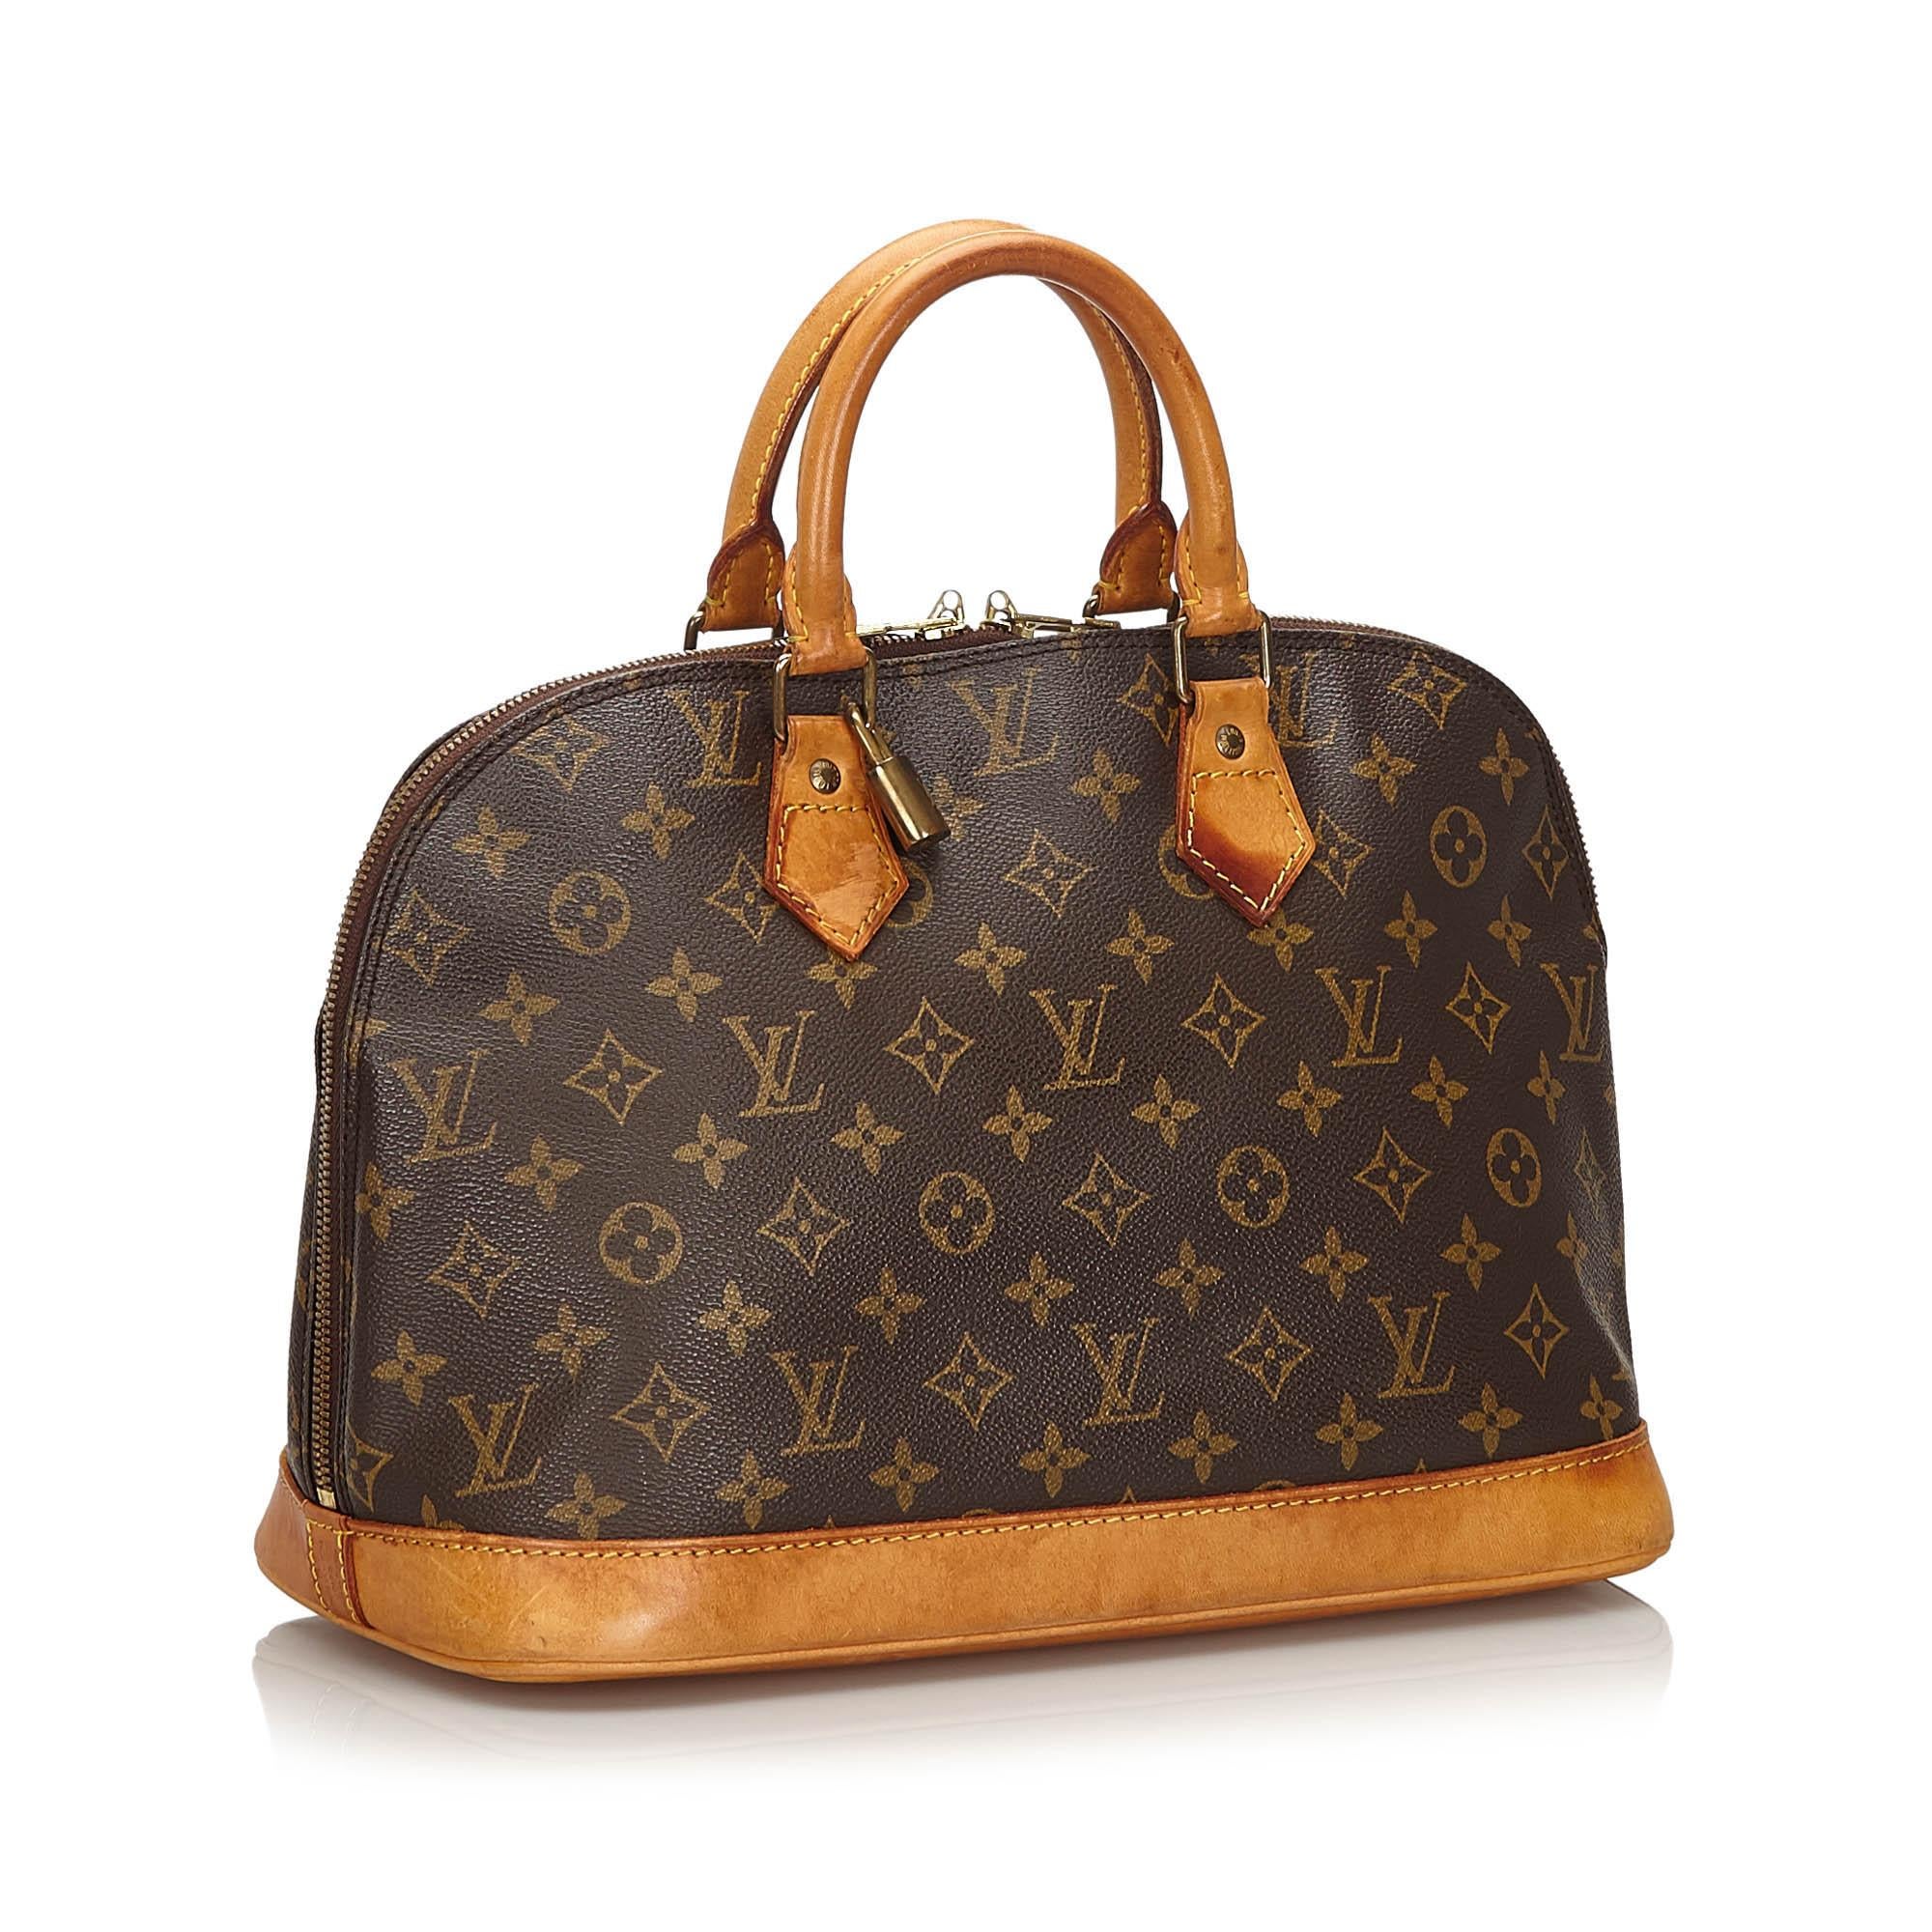 The Alma PM features a monogram canvas body, rolled leather handles, a leather bottom, a top zip closure, and an interior slip pocket. It carries as B condition rating.

Inclusions: 
Padlock
Padlock

Louis Vuitton pieces do not come with an